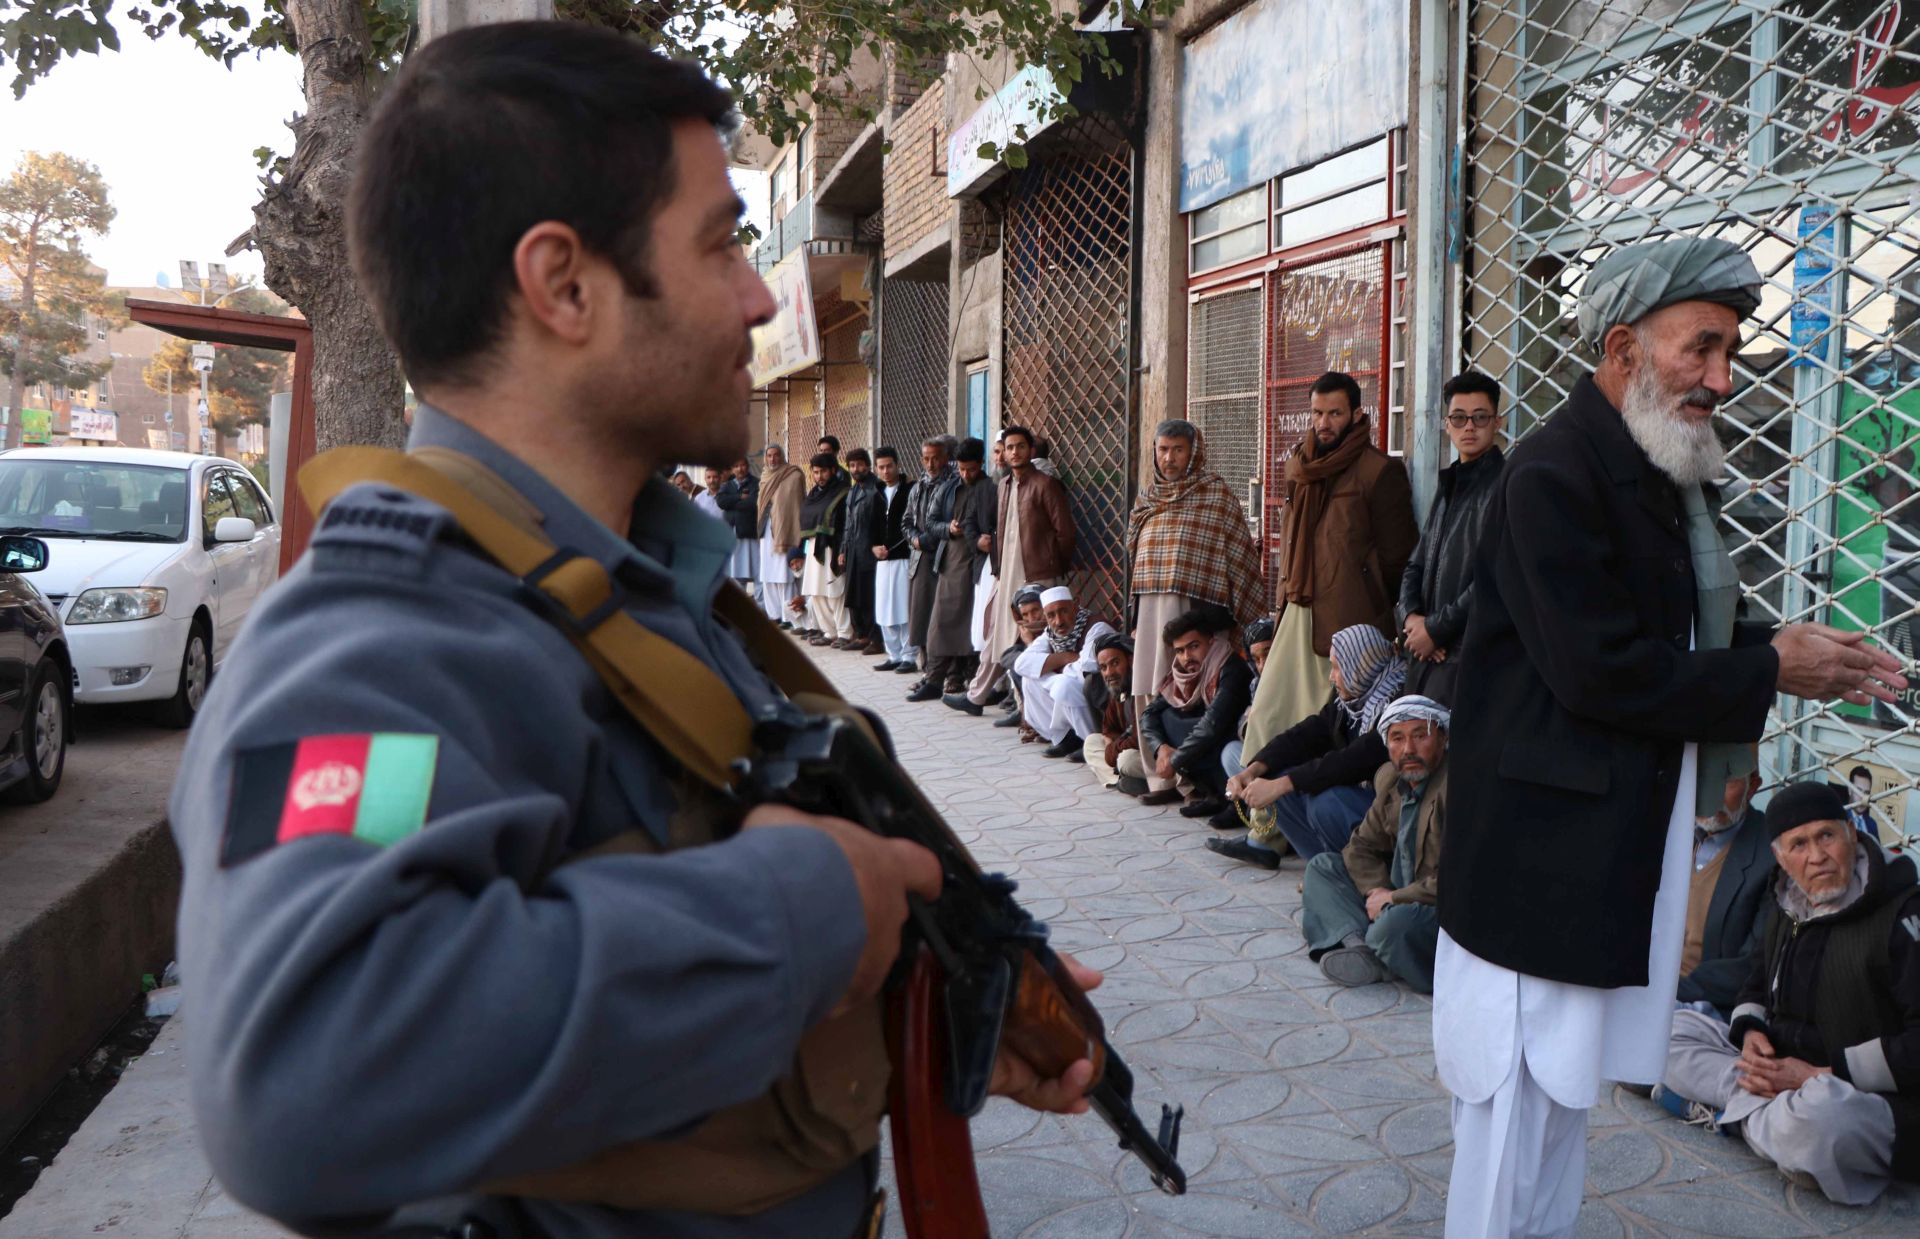 epa07106072 Afghans wait outside a polling station to cast their ballot during parliamentary elections in Herat, Afghanistan, 20 October 2018. The Taliban on 19 October threatened to boycott the upcoming parliamentary elections in Afghanistan and block roads in the country. More than 2,500 candidates are contesting in 249 seats in the Afghan parliament.  EPA/JALIL REZAYEE